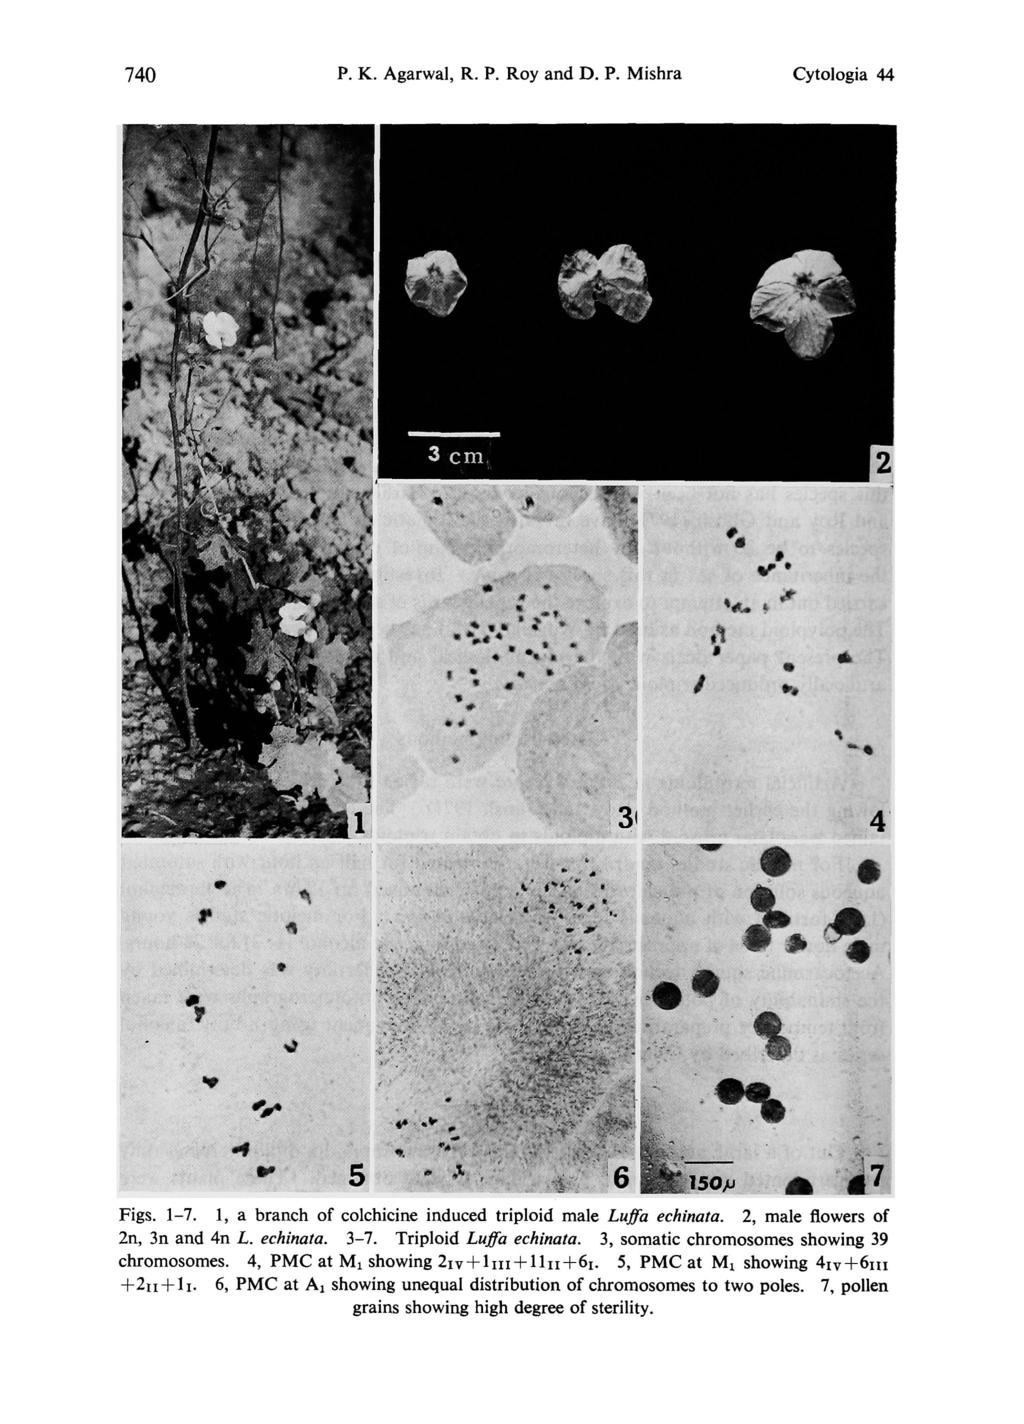 740 P. K. Agarwal, R. P. Roy and D. P. Mishra Cytologia 44 Figs. 1-7. 1, a branch of colchicine induced triploid male Luffa echinata. 2, male flowers of 2n, 3n and 4n L. echinata. 3-7.